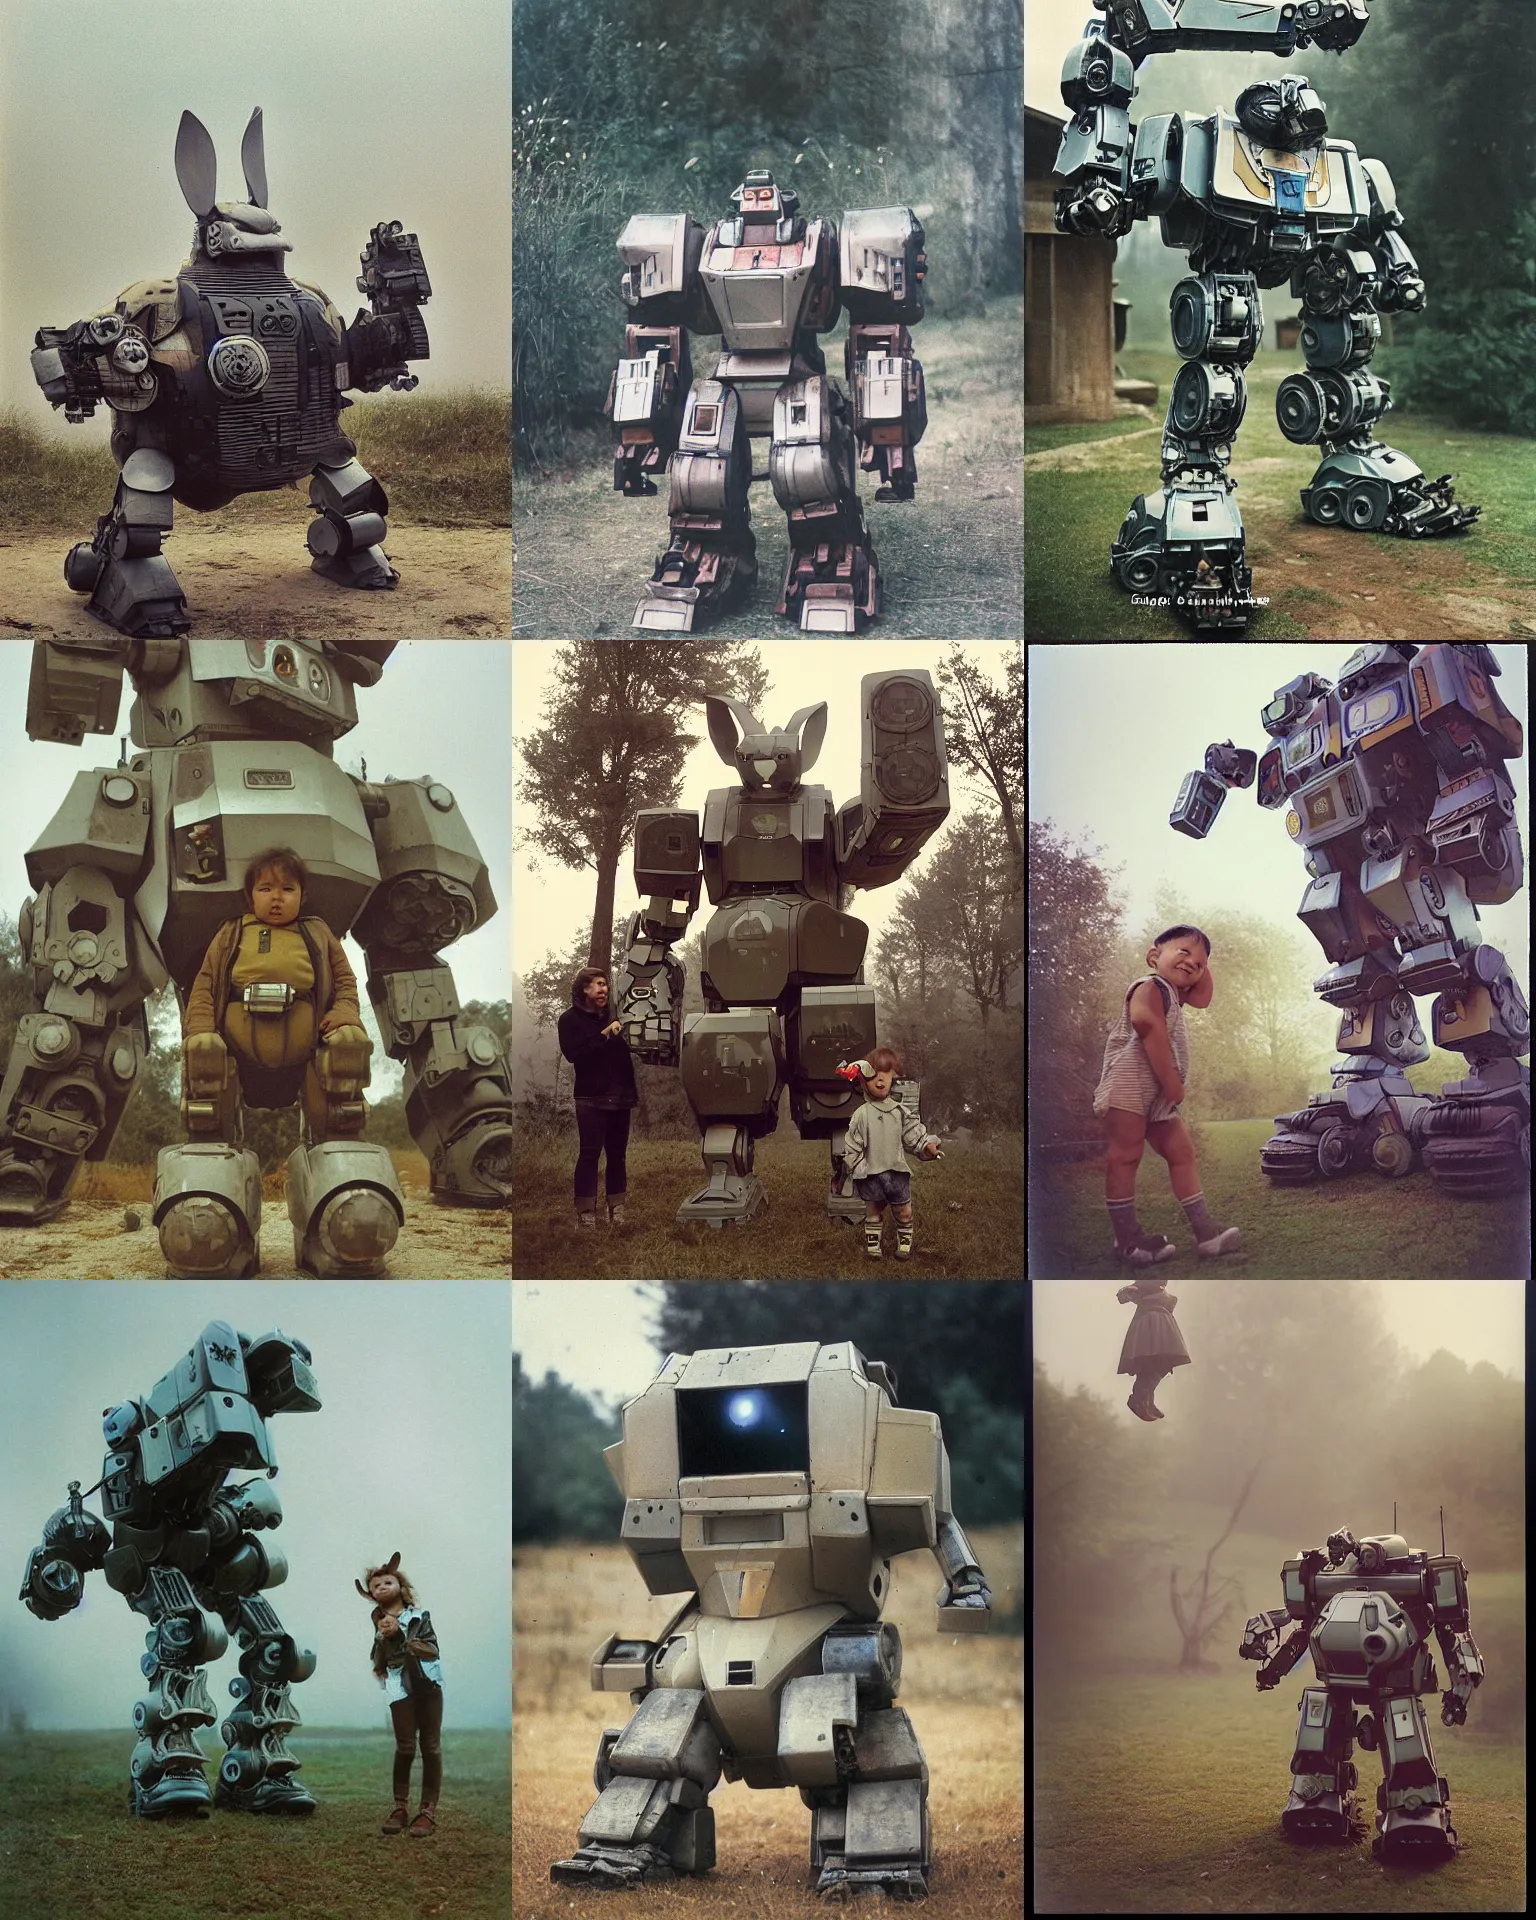 Prompt: giant oversized futuristic chubby battle robot mech with giant rabbit ears as giant cyborg baby on neandertha village , Cinematic focus, telephoto lens, Polaroid photo, vintage, neutral colors, soft lights, foggy ,by Steve Hanks, by Serov Valentin, by lisa yuskavage, by Andrei Tarkovsky